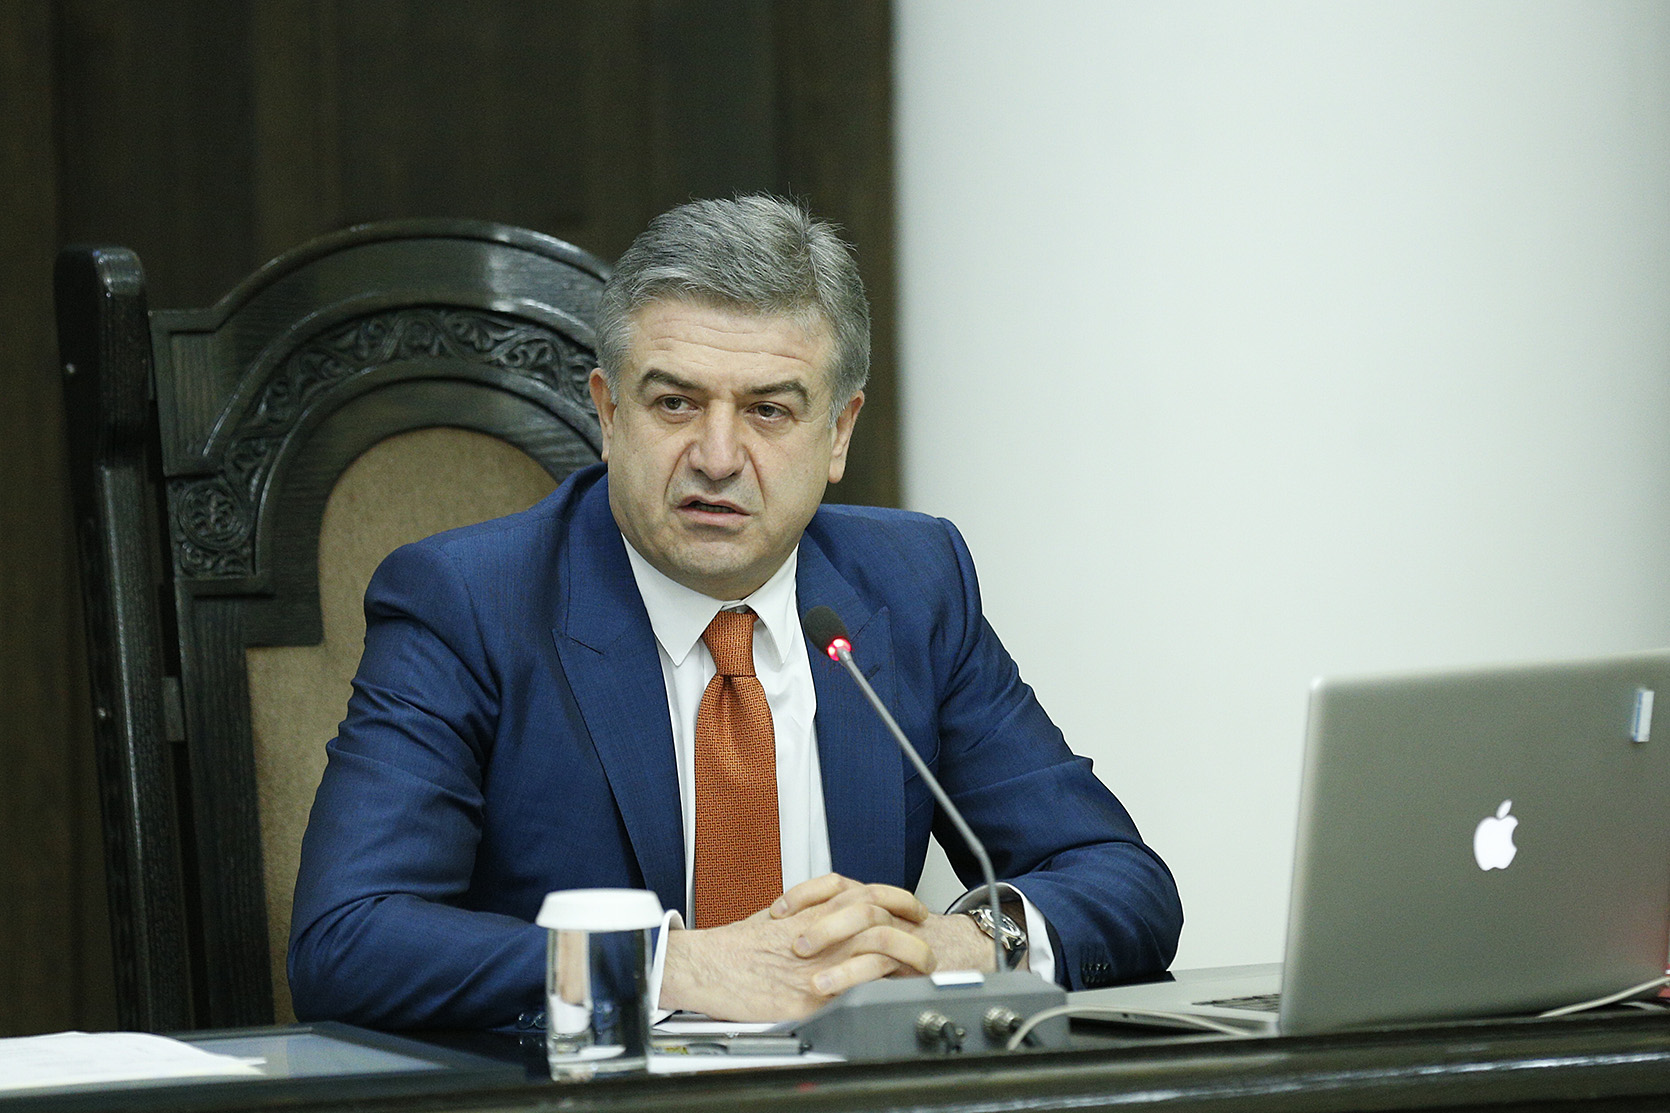 Karen Karapetyan: ‘We must fulfill our responsibilities faithfully before the formation of a new government’